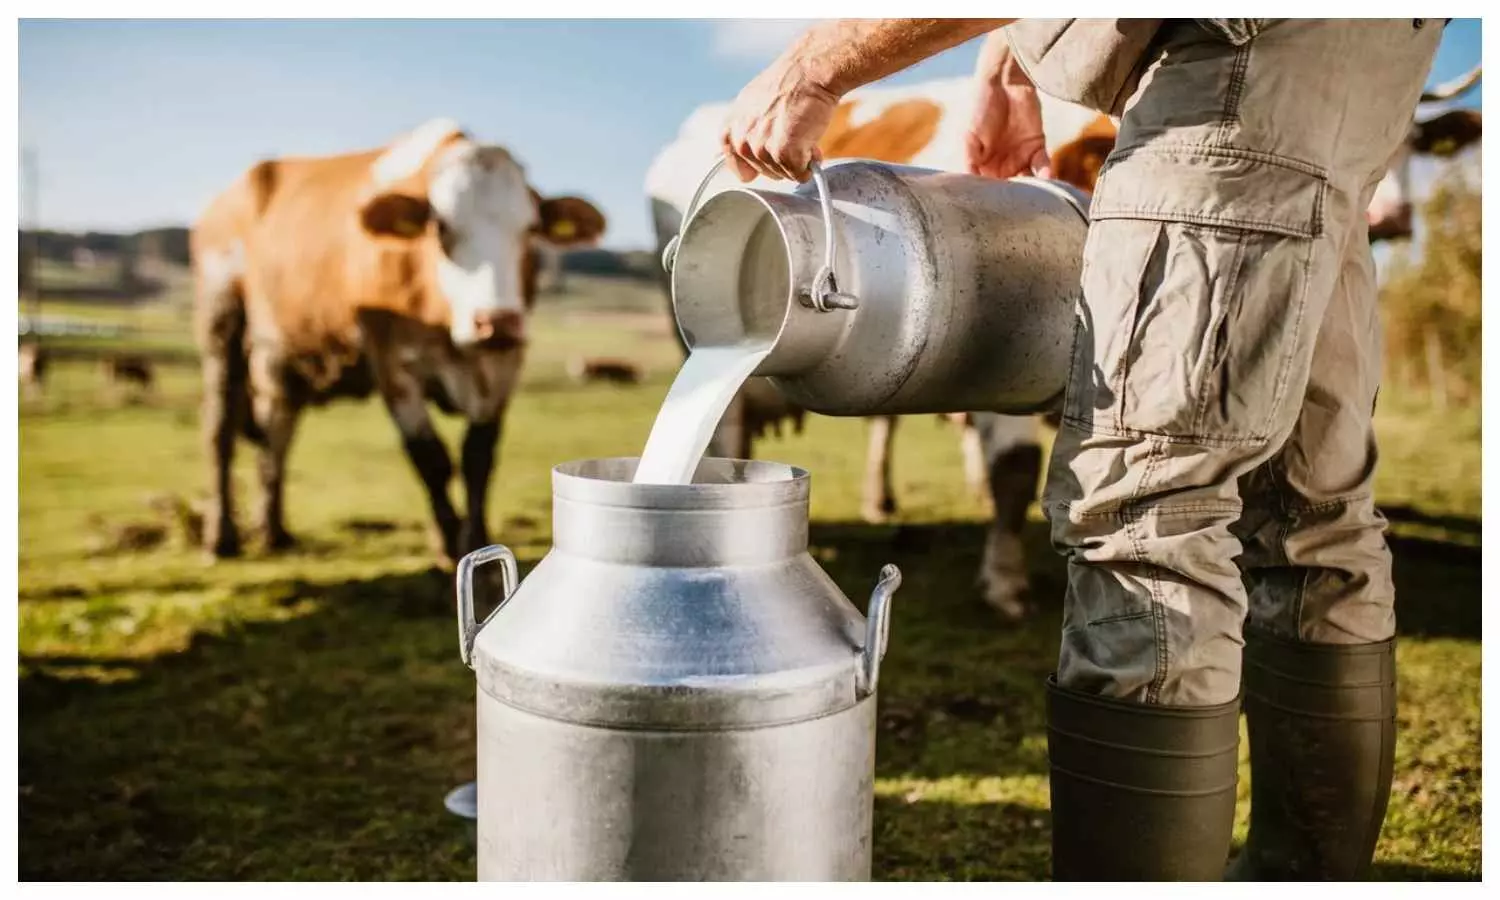 How To Plan Dairy Business